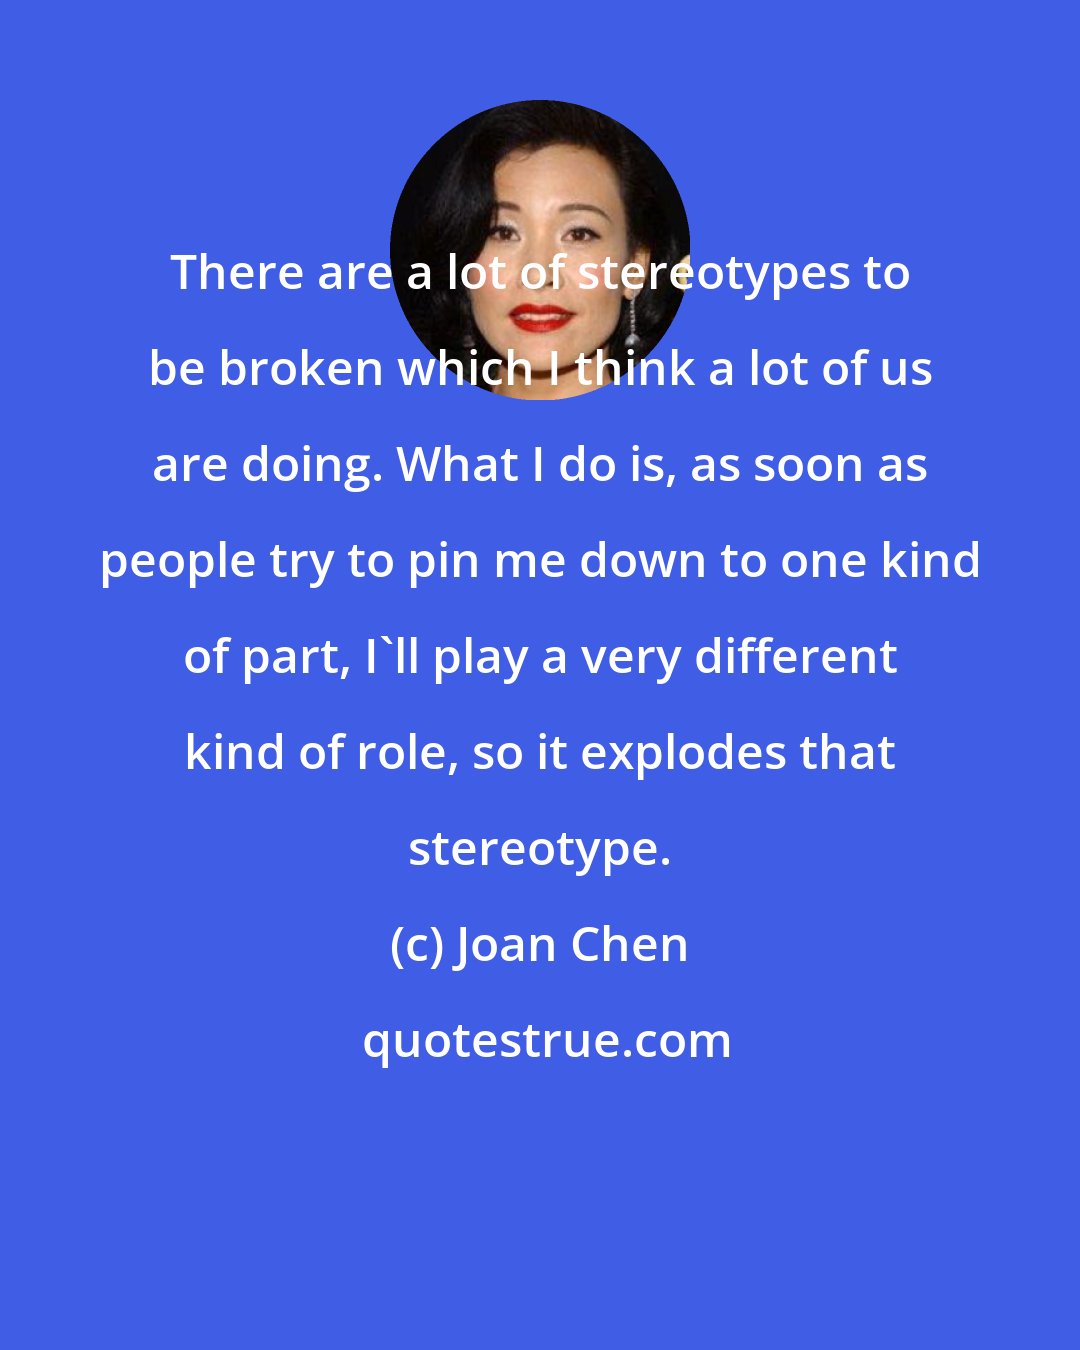 Joan Chen: There are a lot of stereotypes to be broken which I think a lot of us are doing. What I do is, as soon as people try to pin me down to one kind of part, I'll play a very different kind of role, so it explodes that stereotype.